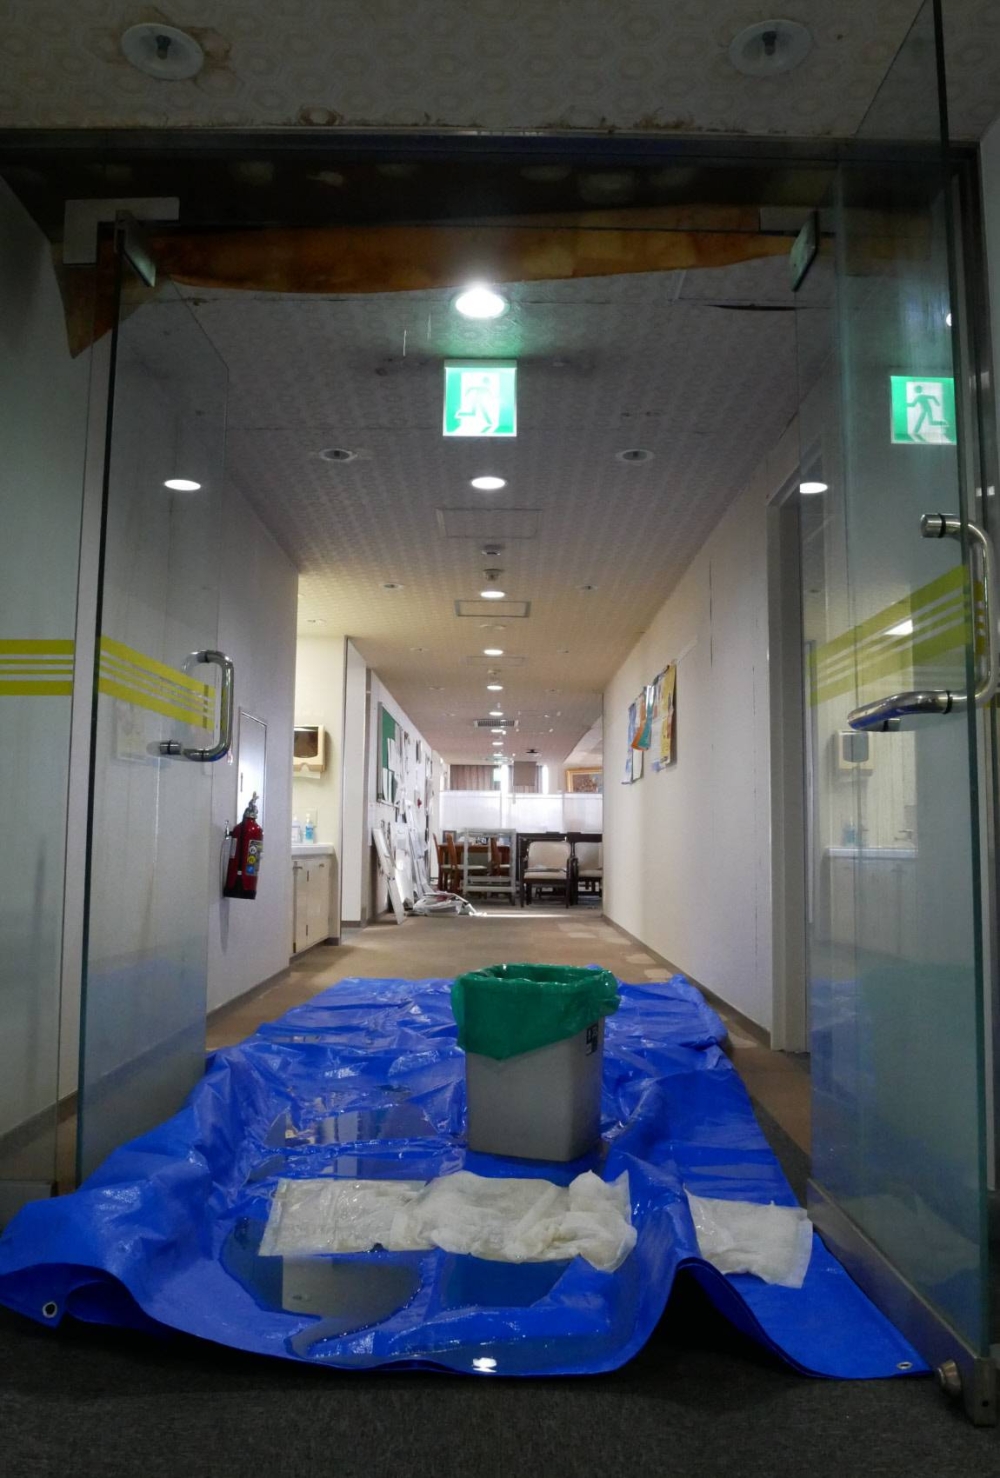 Hospitals in Japan are slow to adopt seismic insulation in their buildings